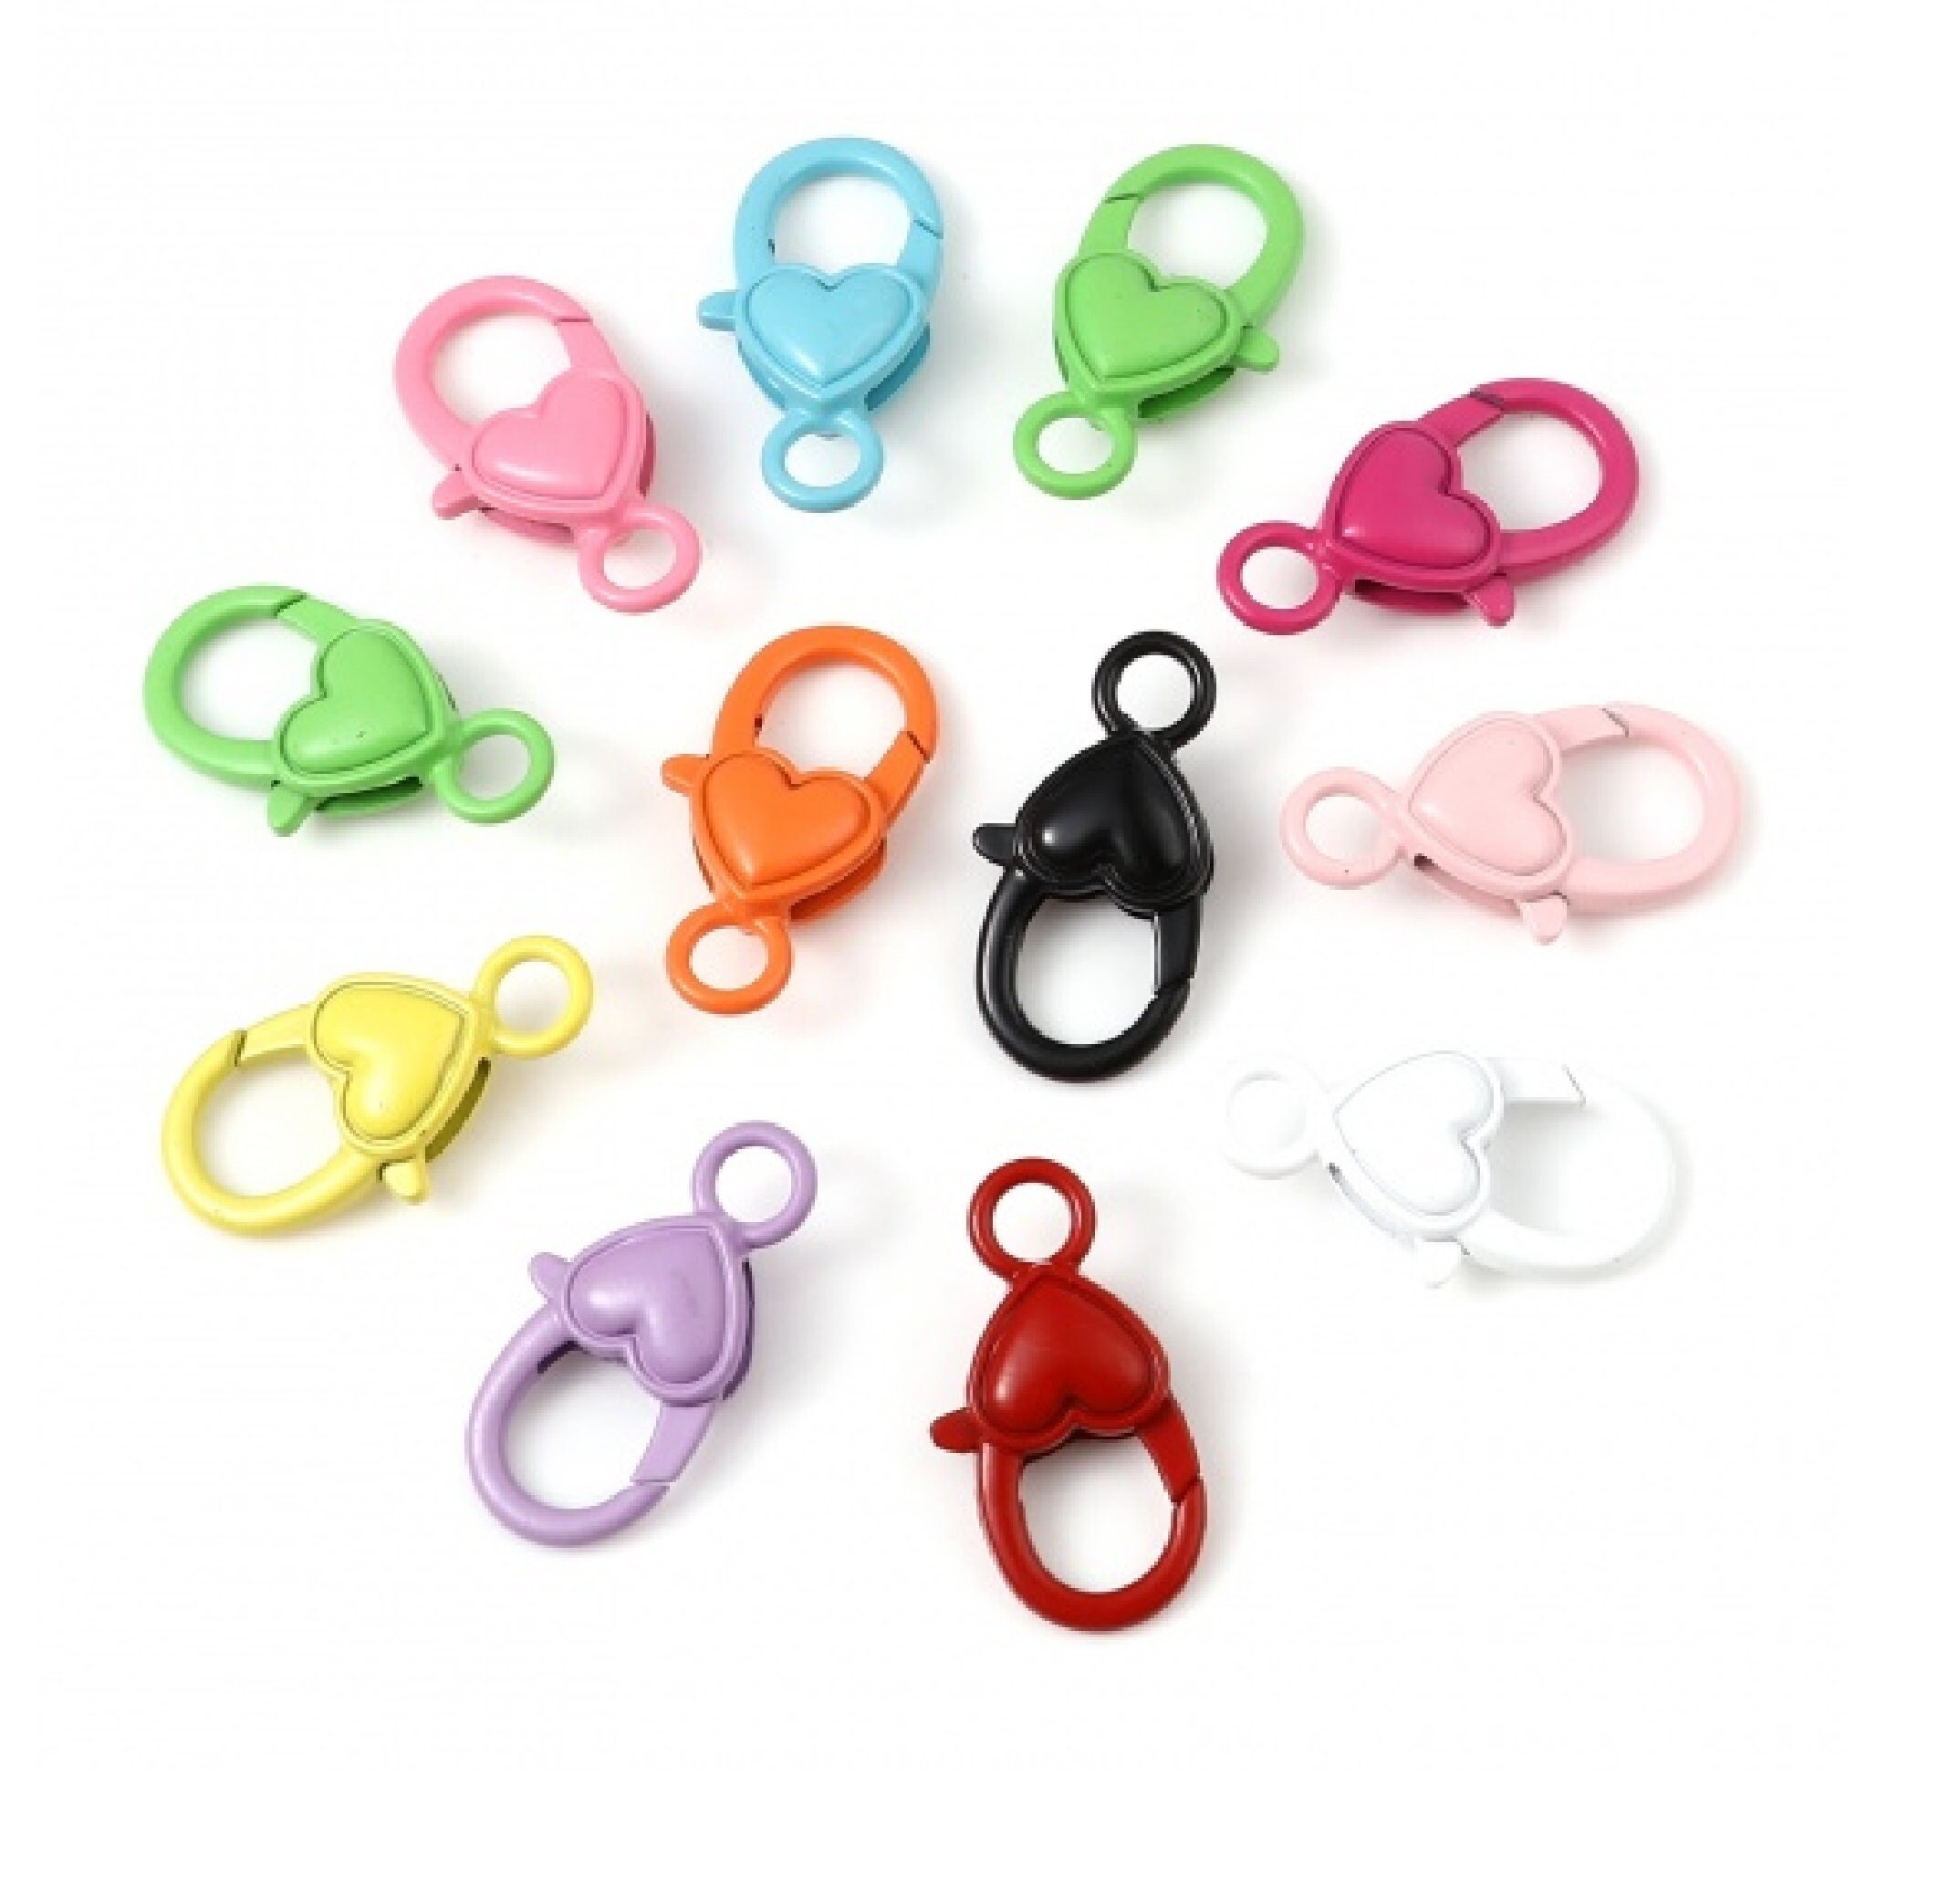 Oubaka 120pcs Plastic Lobster Claw Clasps for Jewelry Making,Multicolor Lobster Clasp Hook Cute Lanyard Snap Hooks Hard Plastic Clips for Handmade